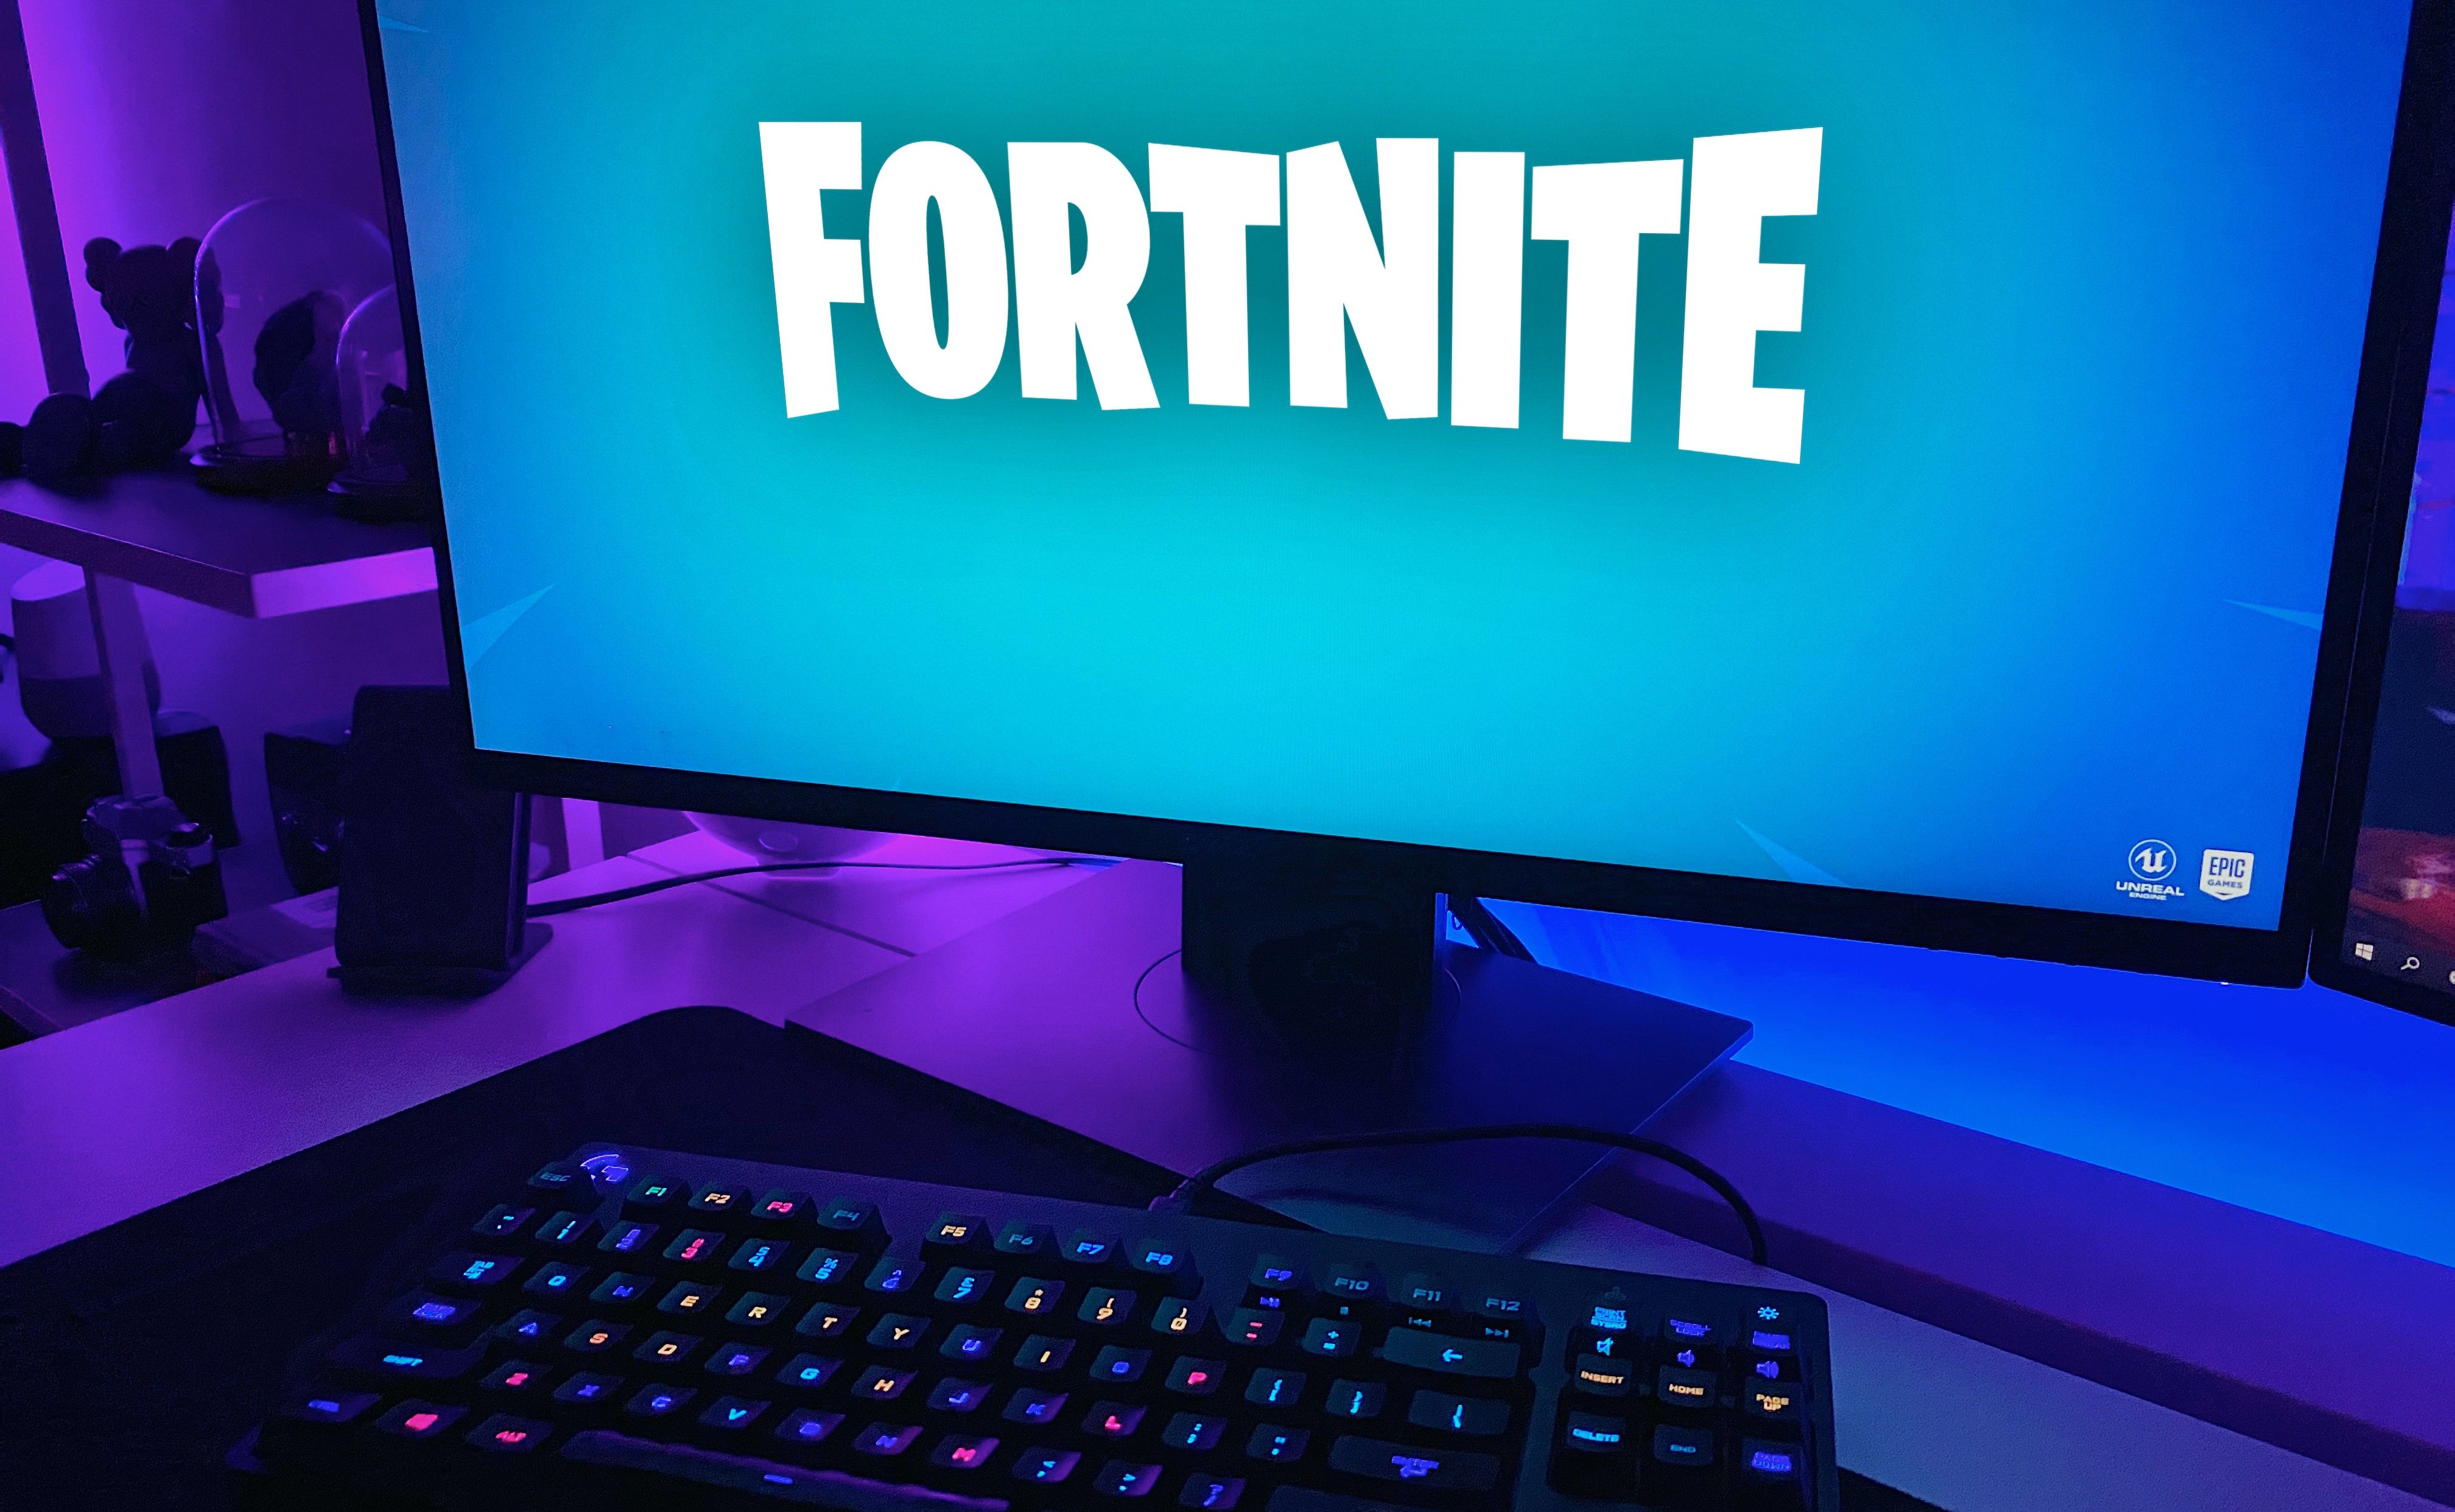 Fortnite being opened on a computer